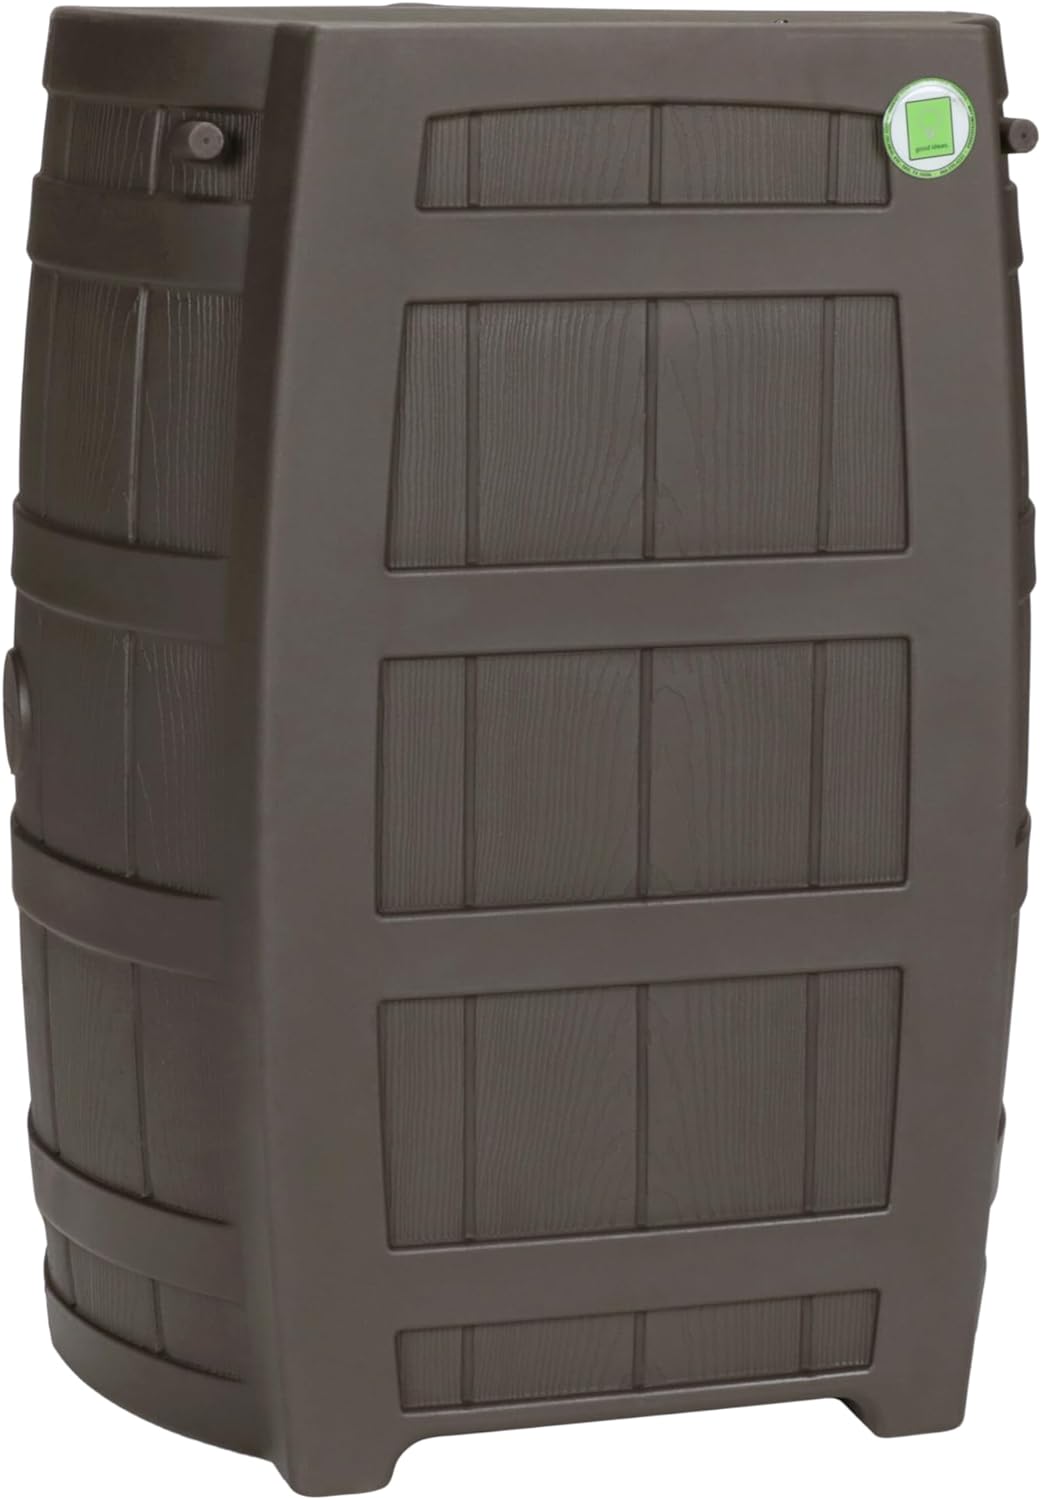 50 Gallon BPA-free Plastic Resin Rain Barrel for Outdoor Rainwater Collection and Storage Features a Metal Spigot